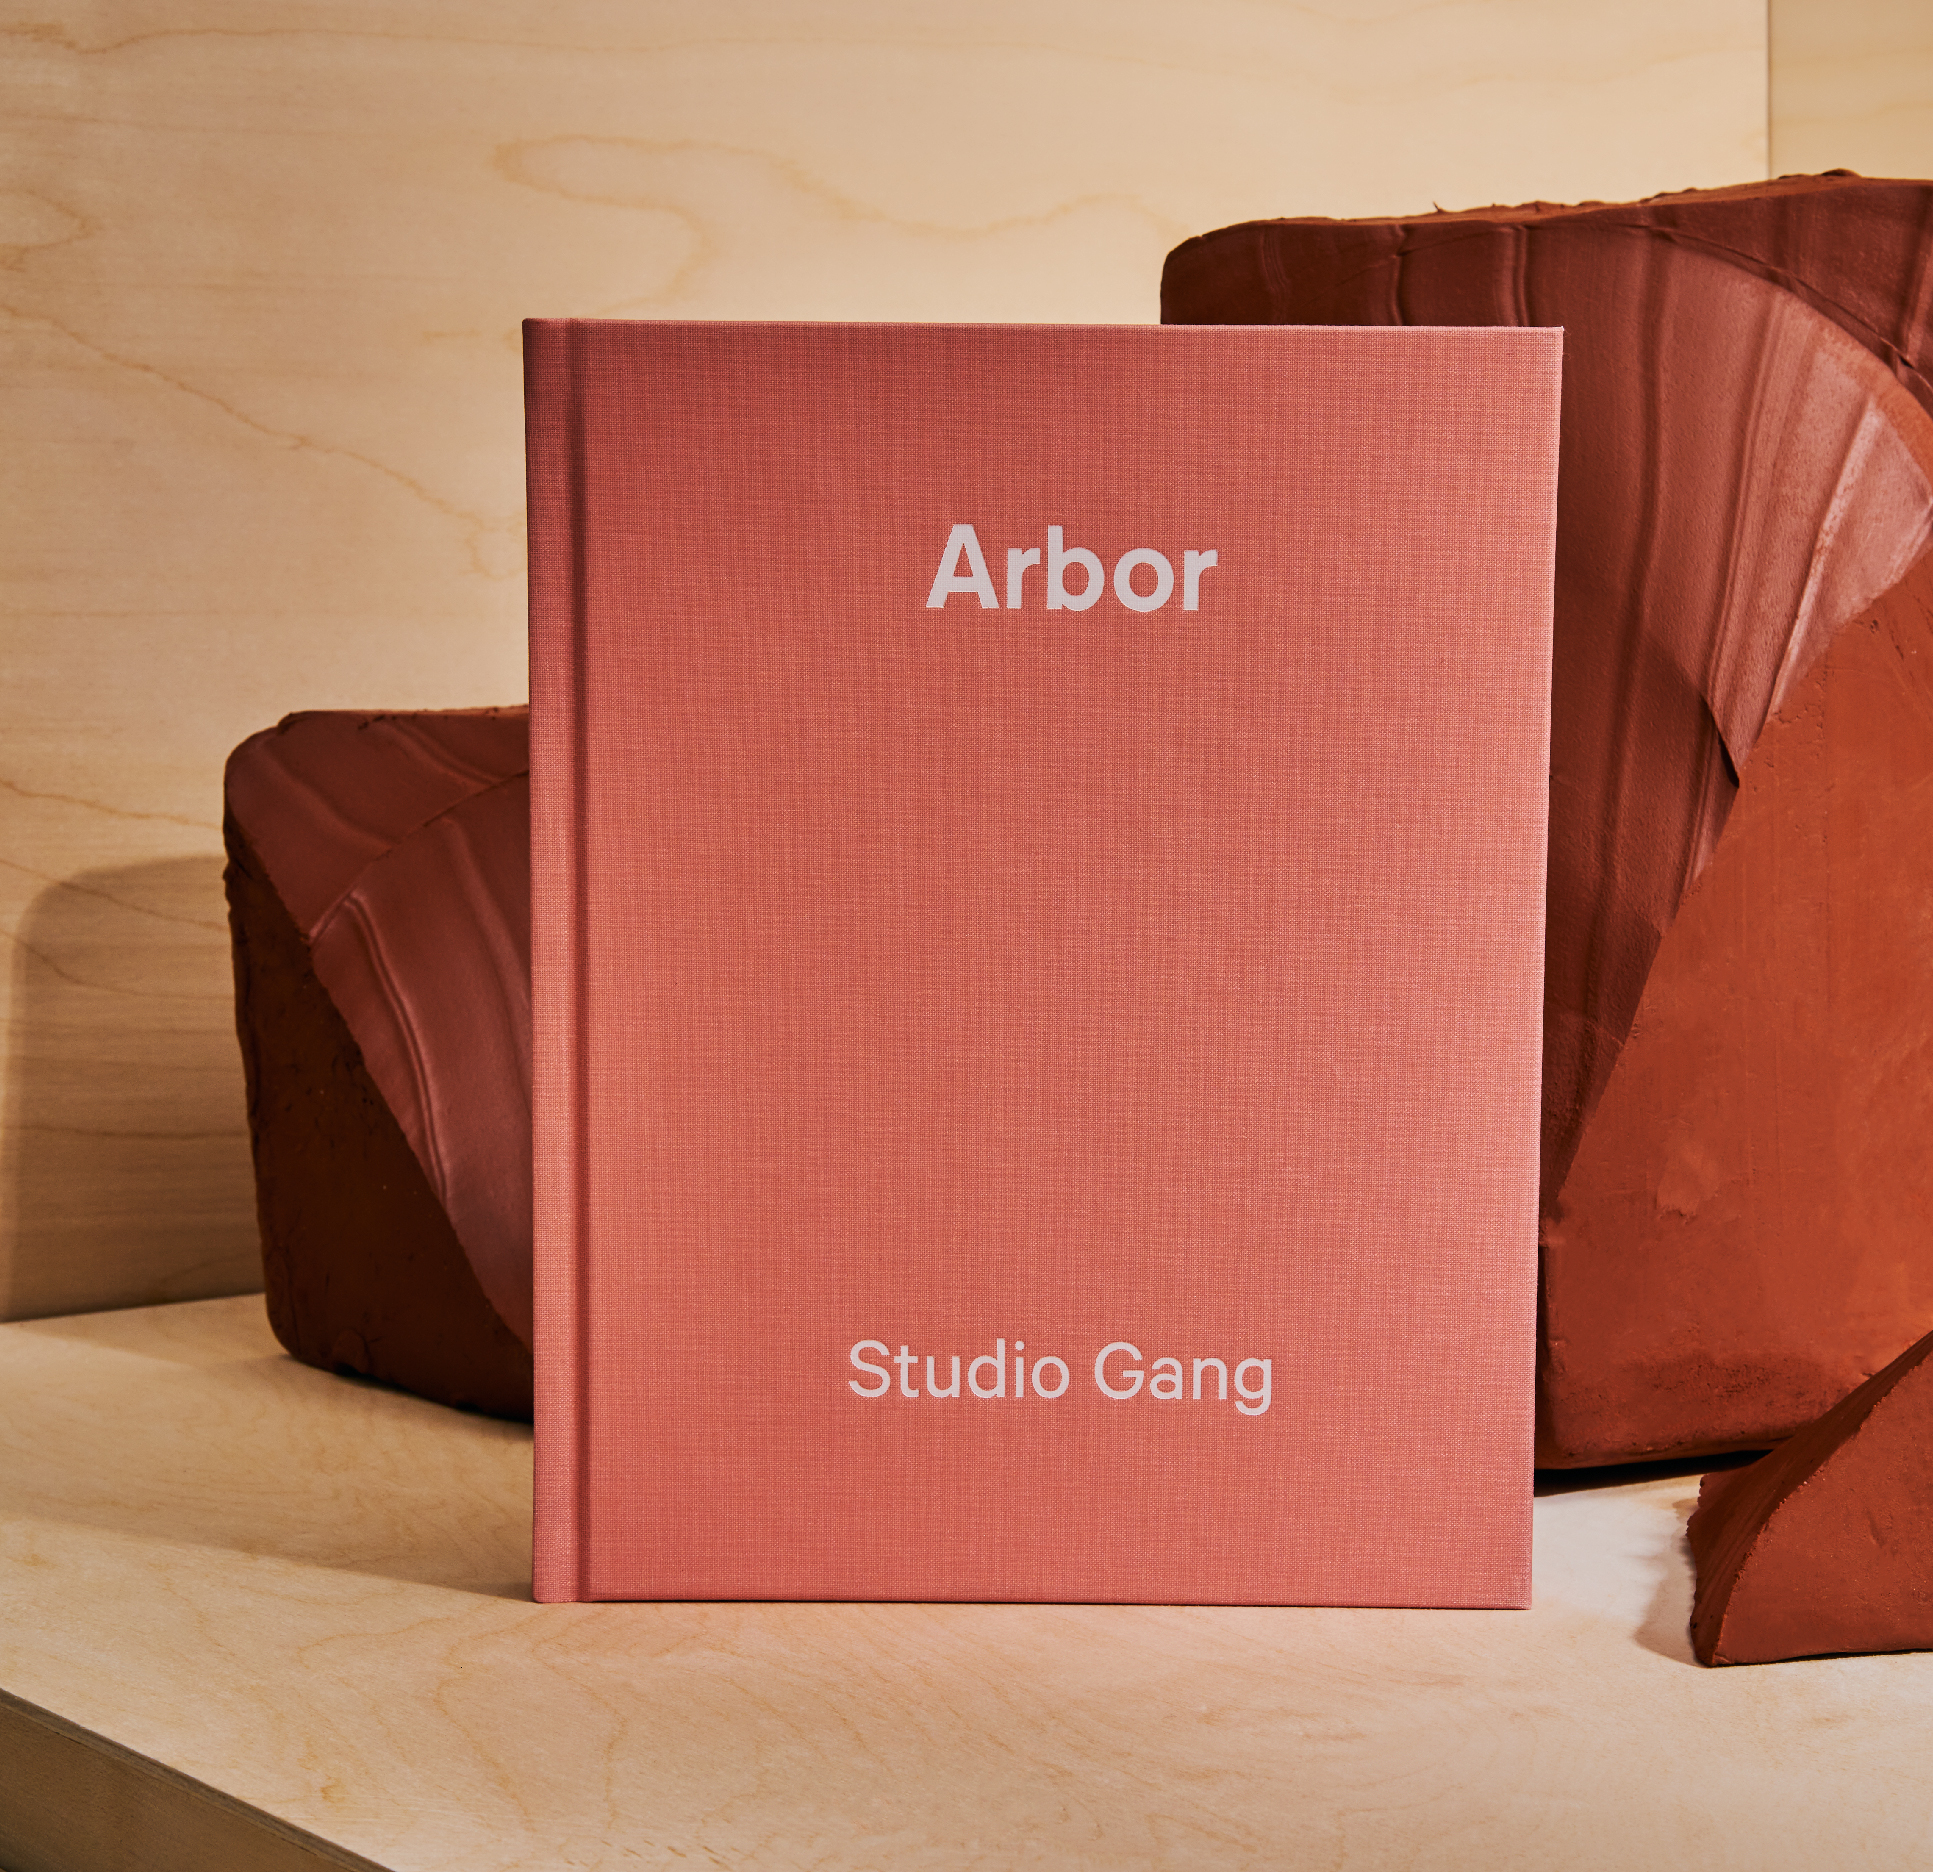 Arbor by Studio Gang, architecture book design.